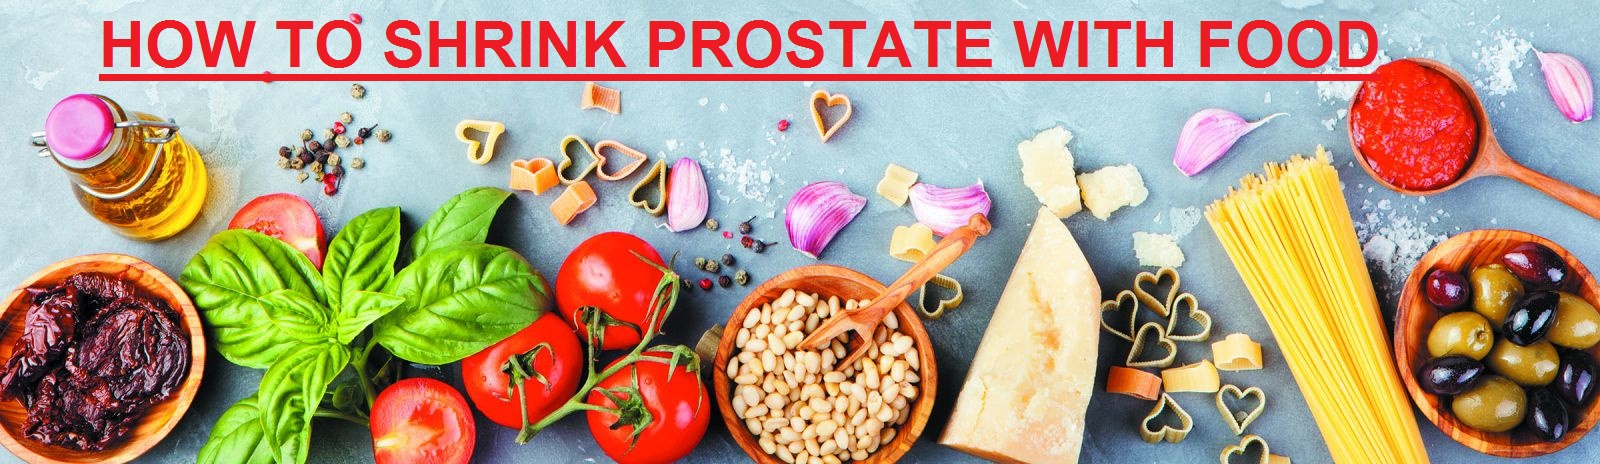 How To shrink prostate with diet | prosman